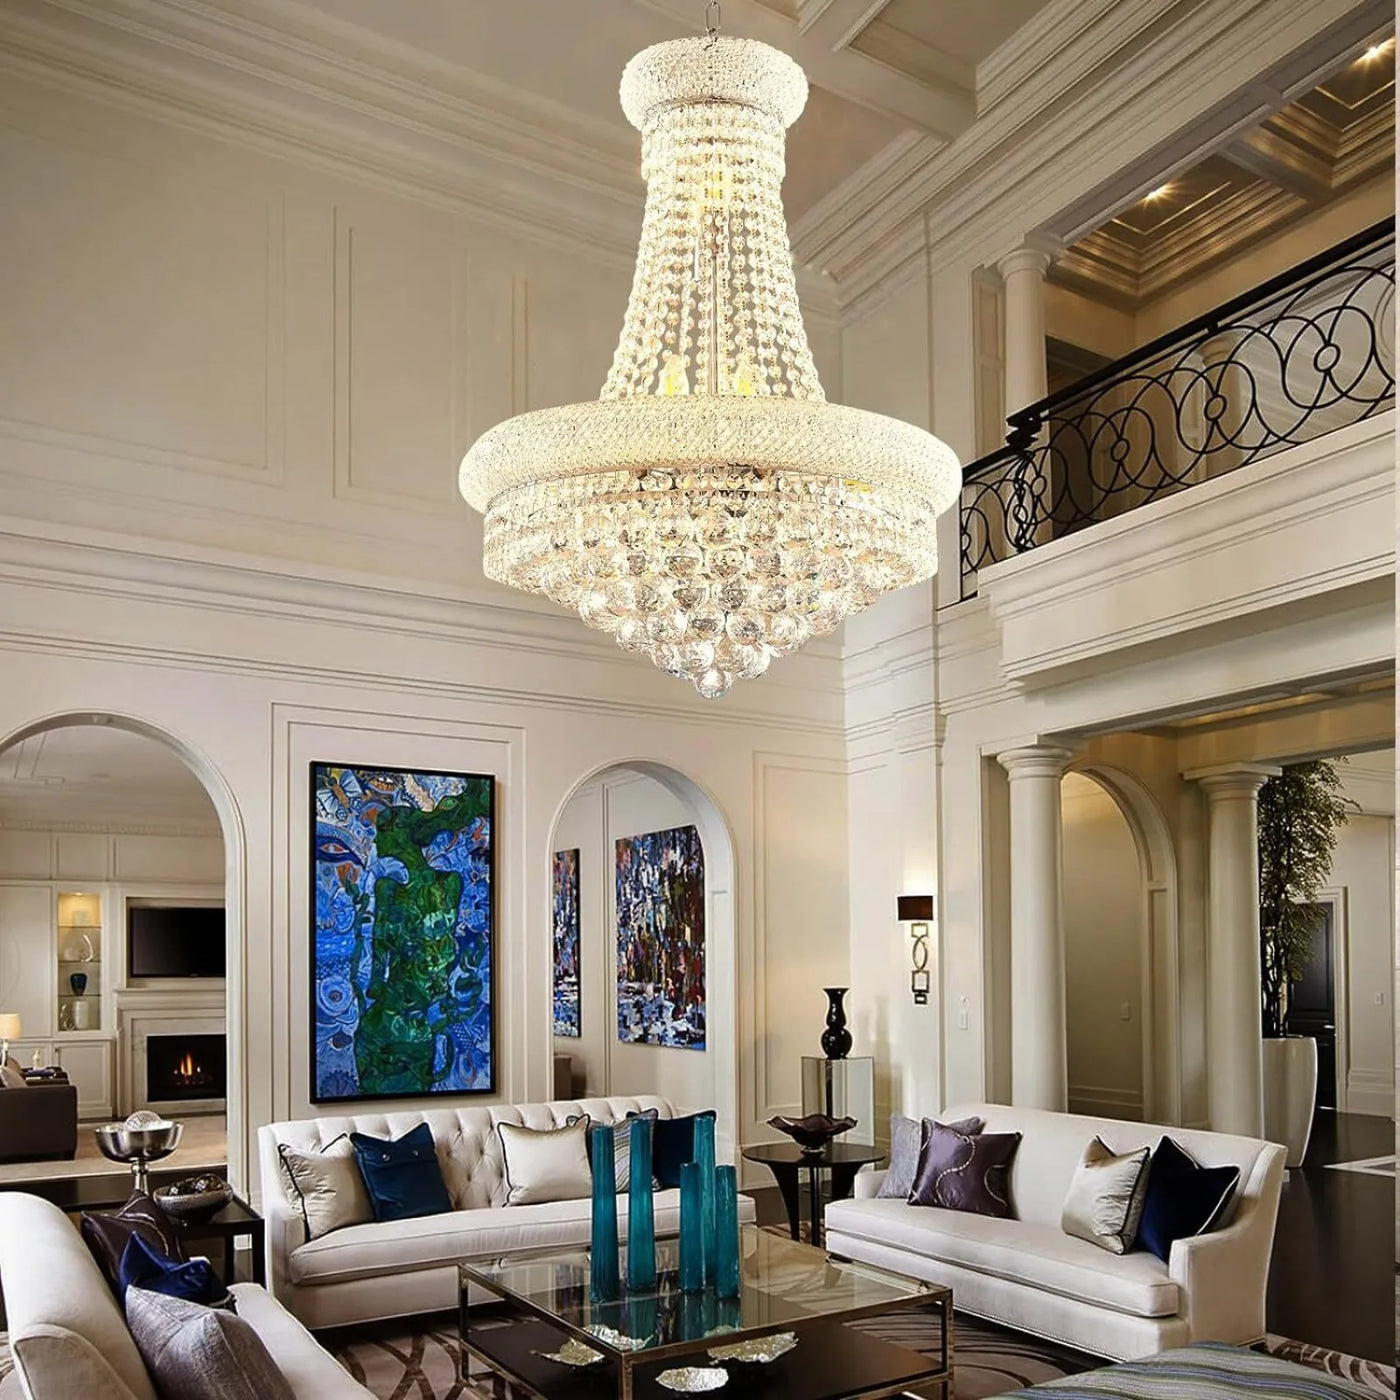 23.6-Inch Luxury Crystal Chandelier Chrome-Plated Imperial Pendant Lamp